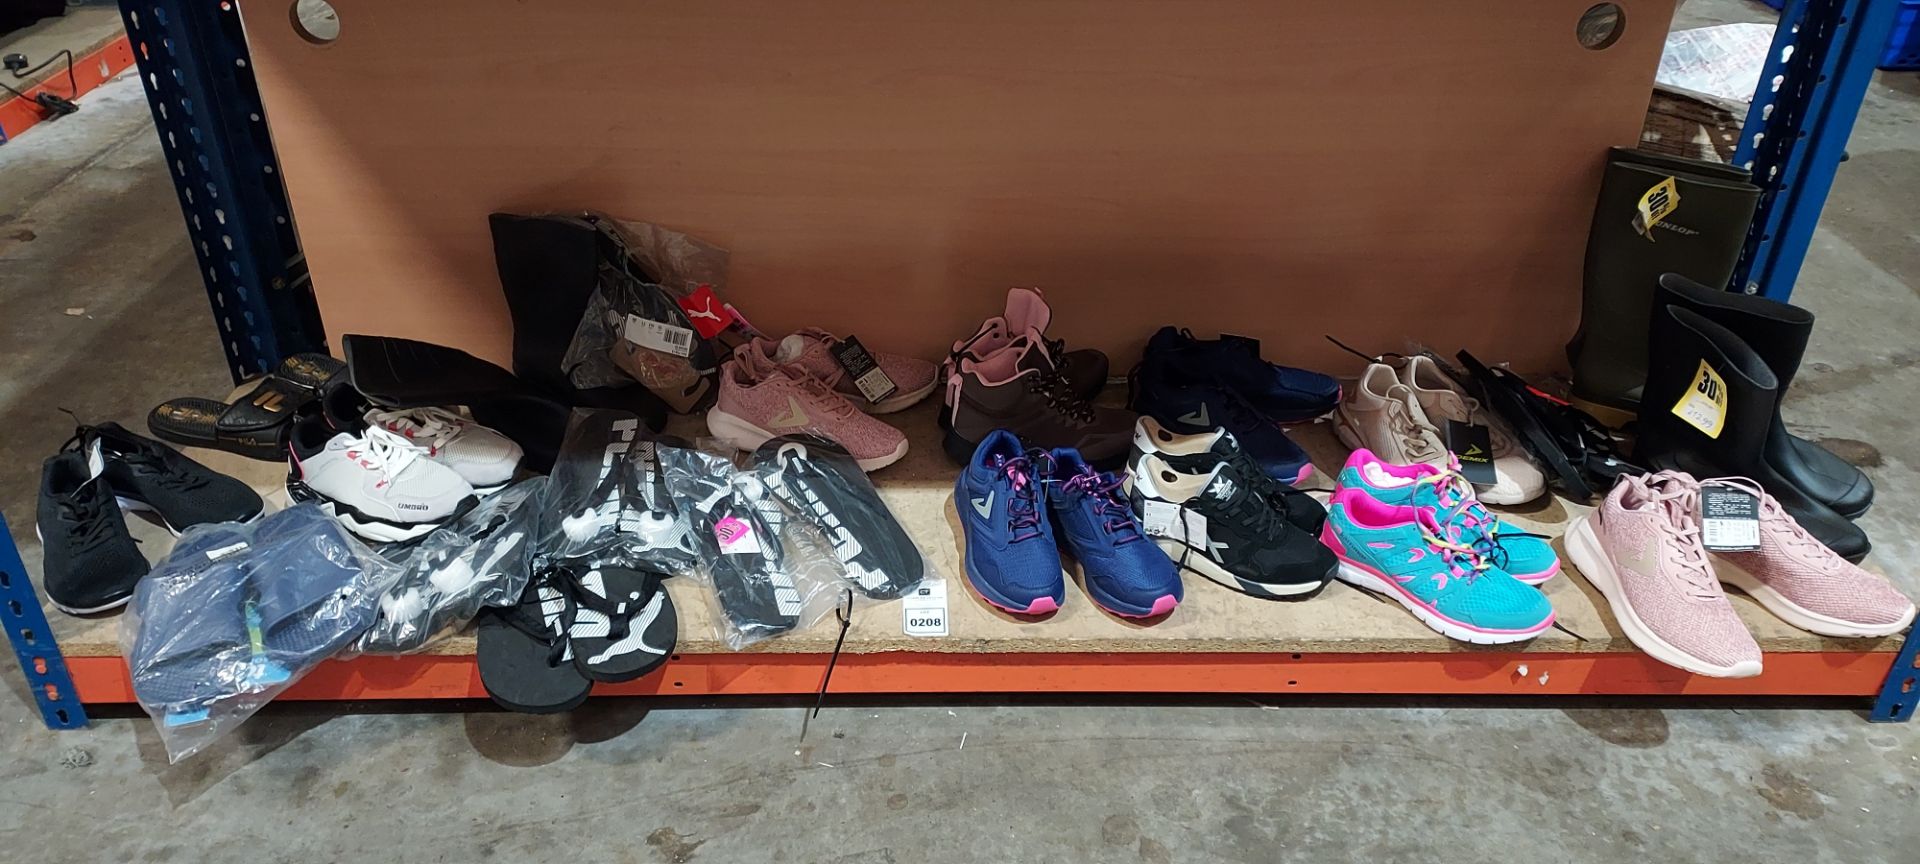 21 X BRAND NEW MIXED SHOES LOT TO INCLUDE PUMA SANDALS - DUNLOP WELLIES - UMBRO TRAINERS - STUDIO